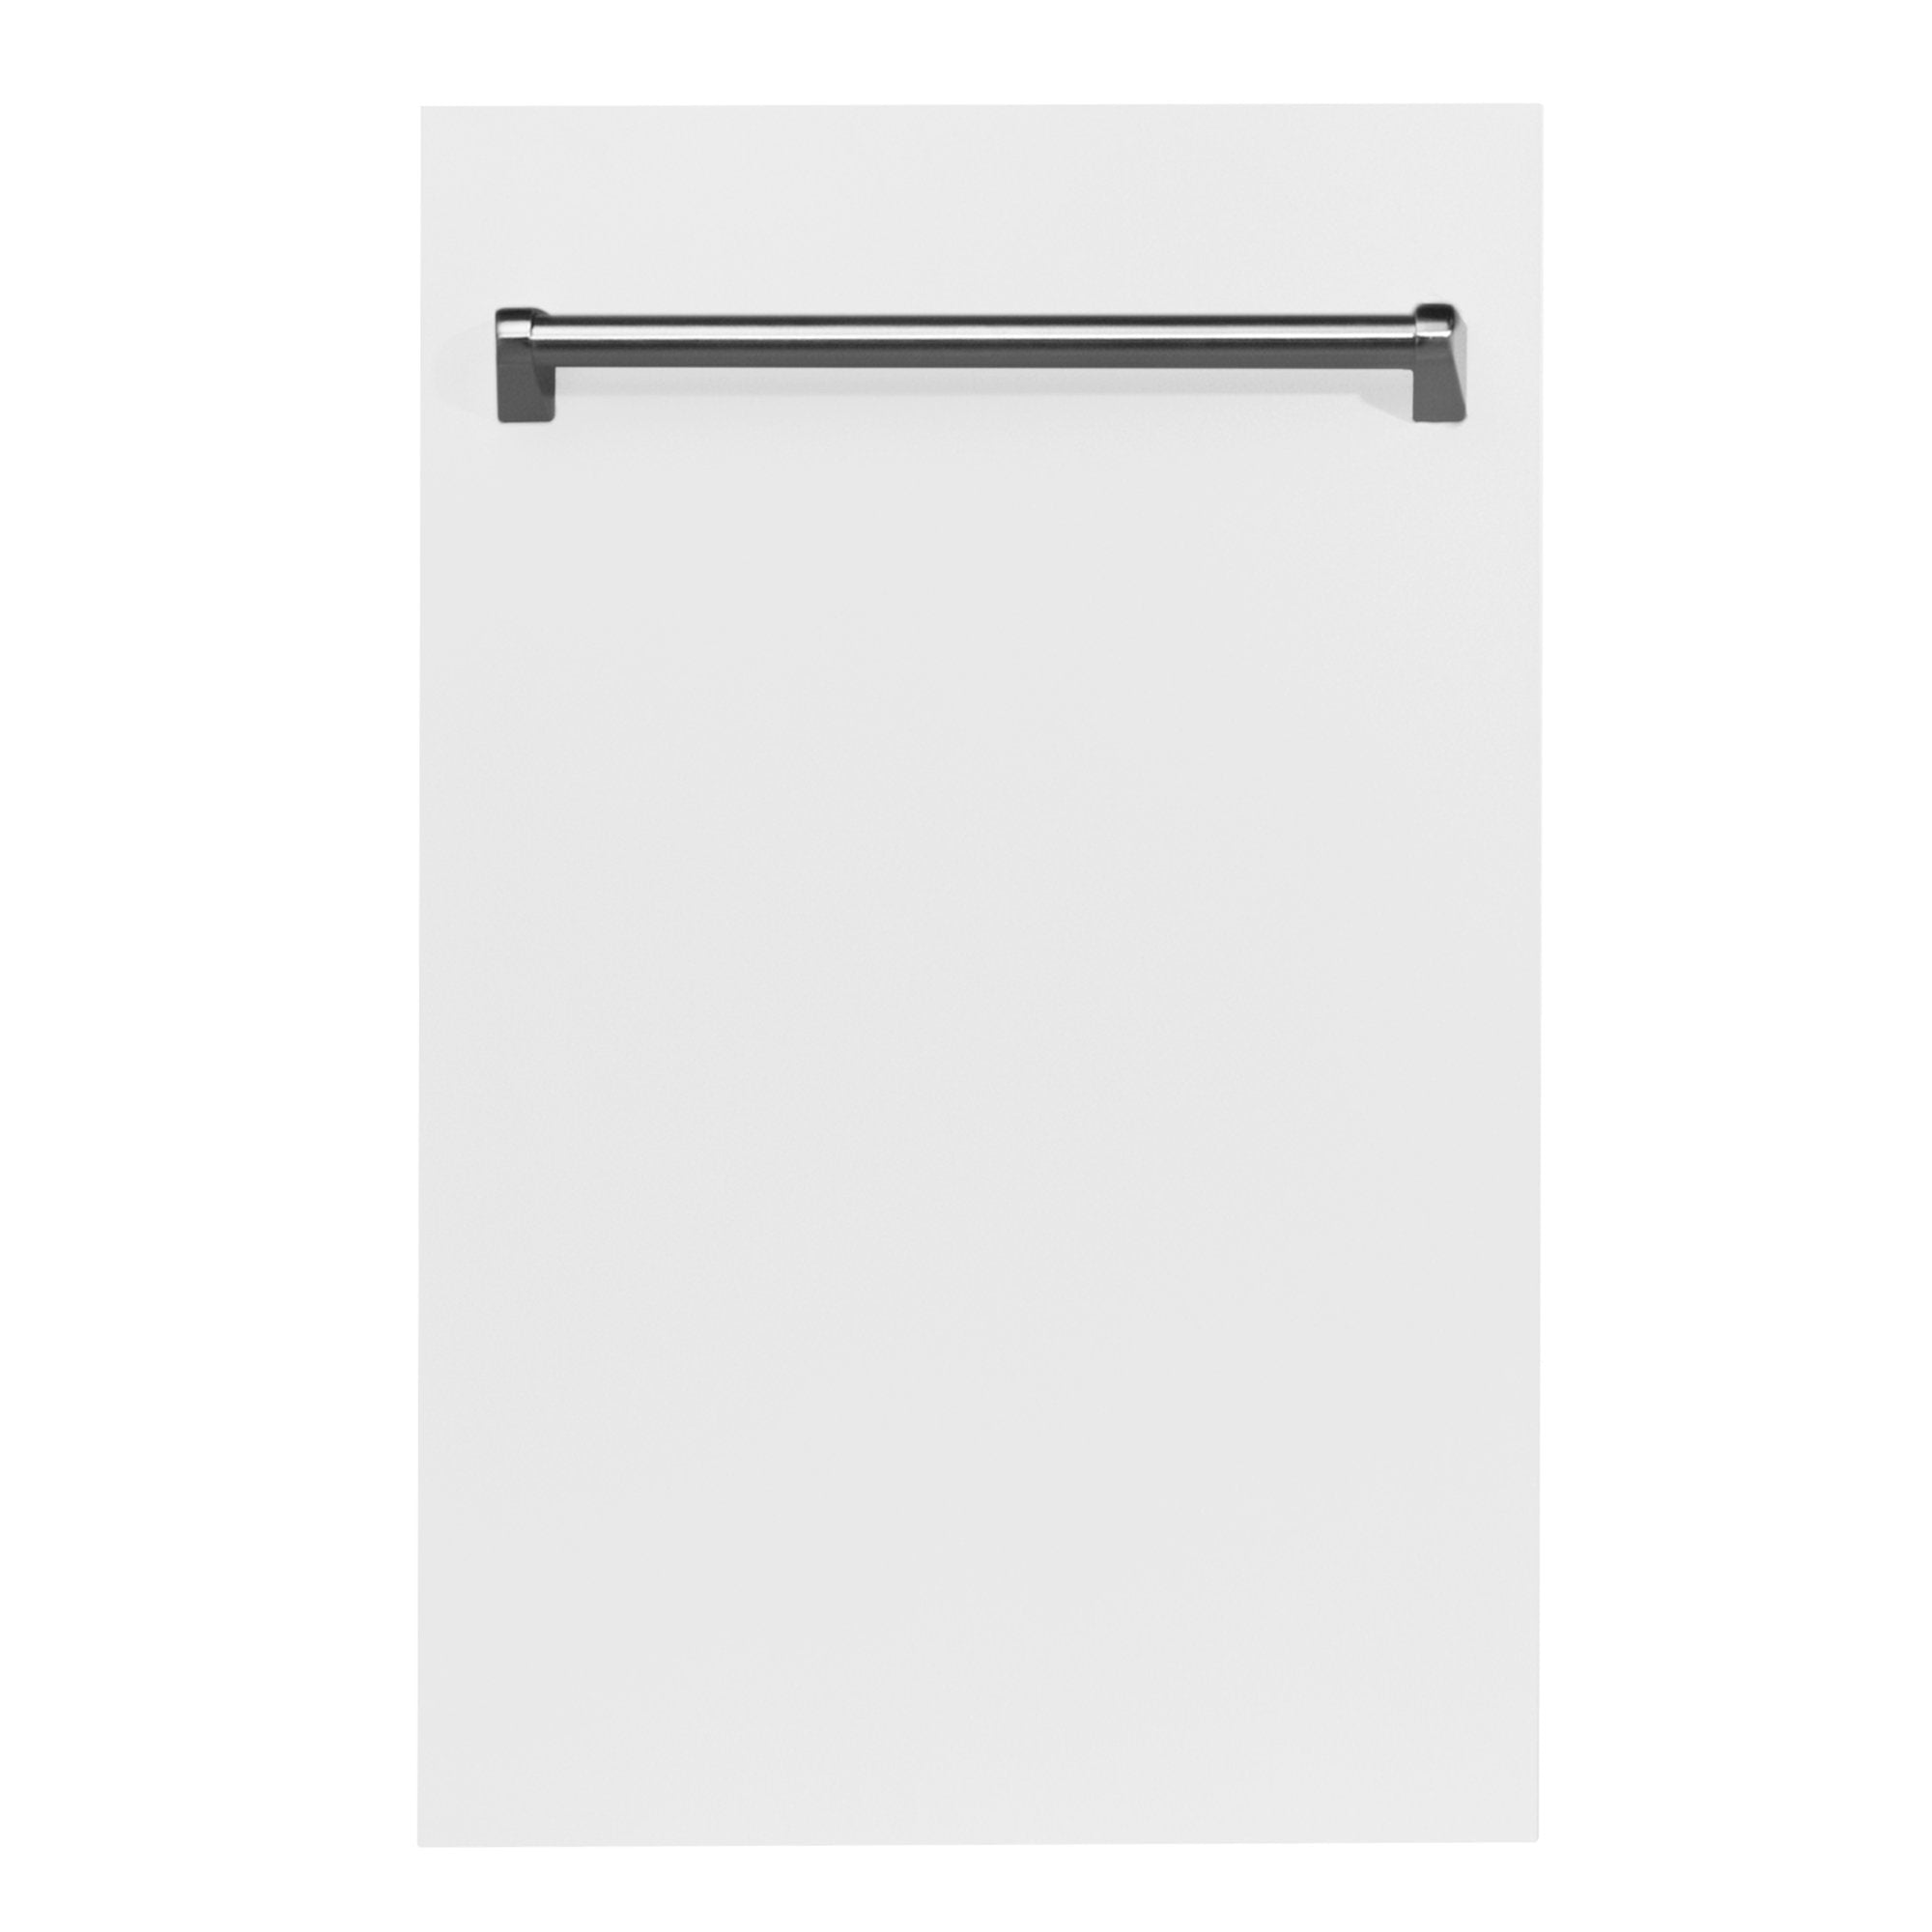 ZLINE Kitchen and Bath, ZLINE 18" Top Control Dishwasher with Stainless Steel Tub and Traditional Style Handle, DW-WM-18,